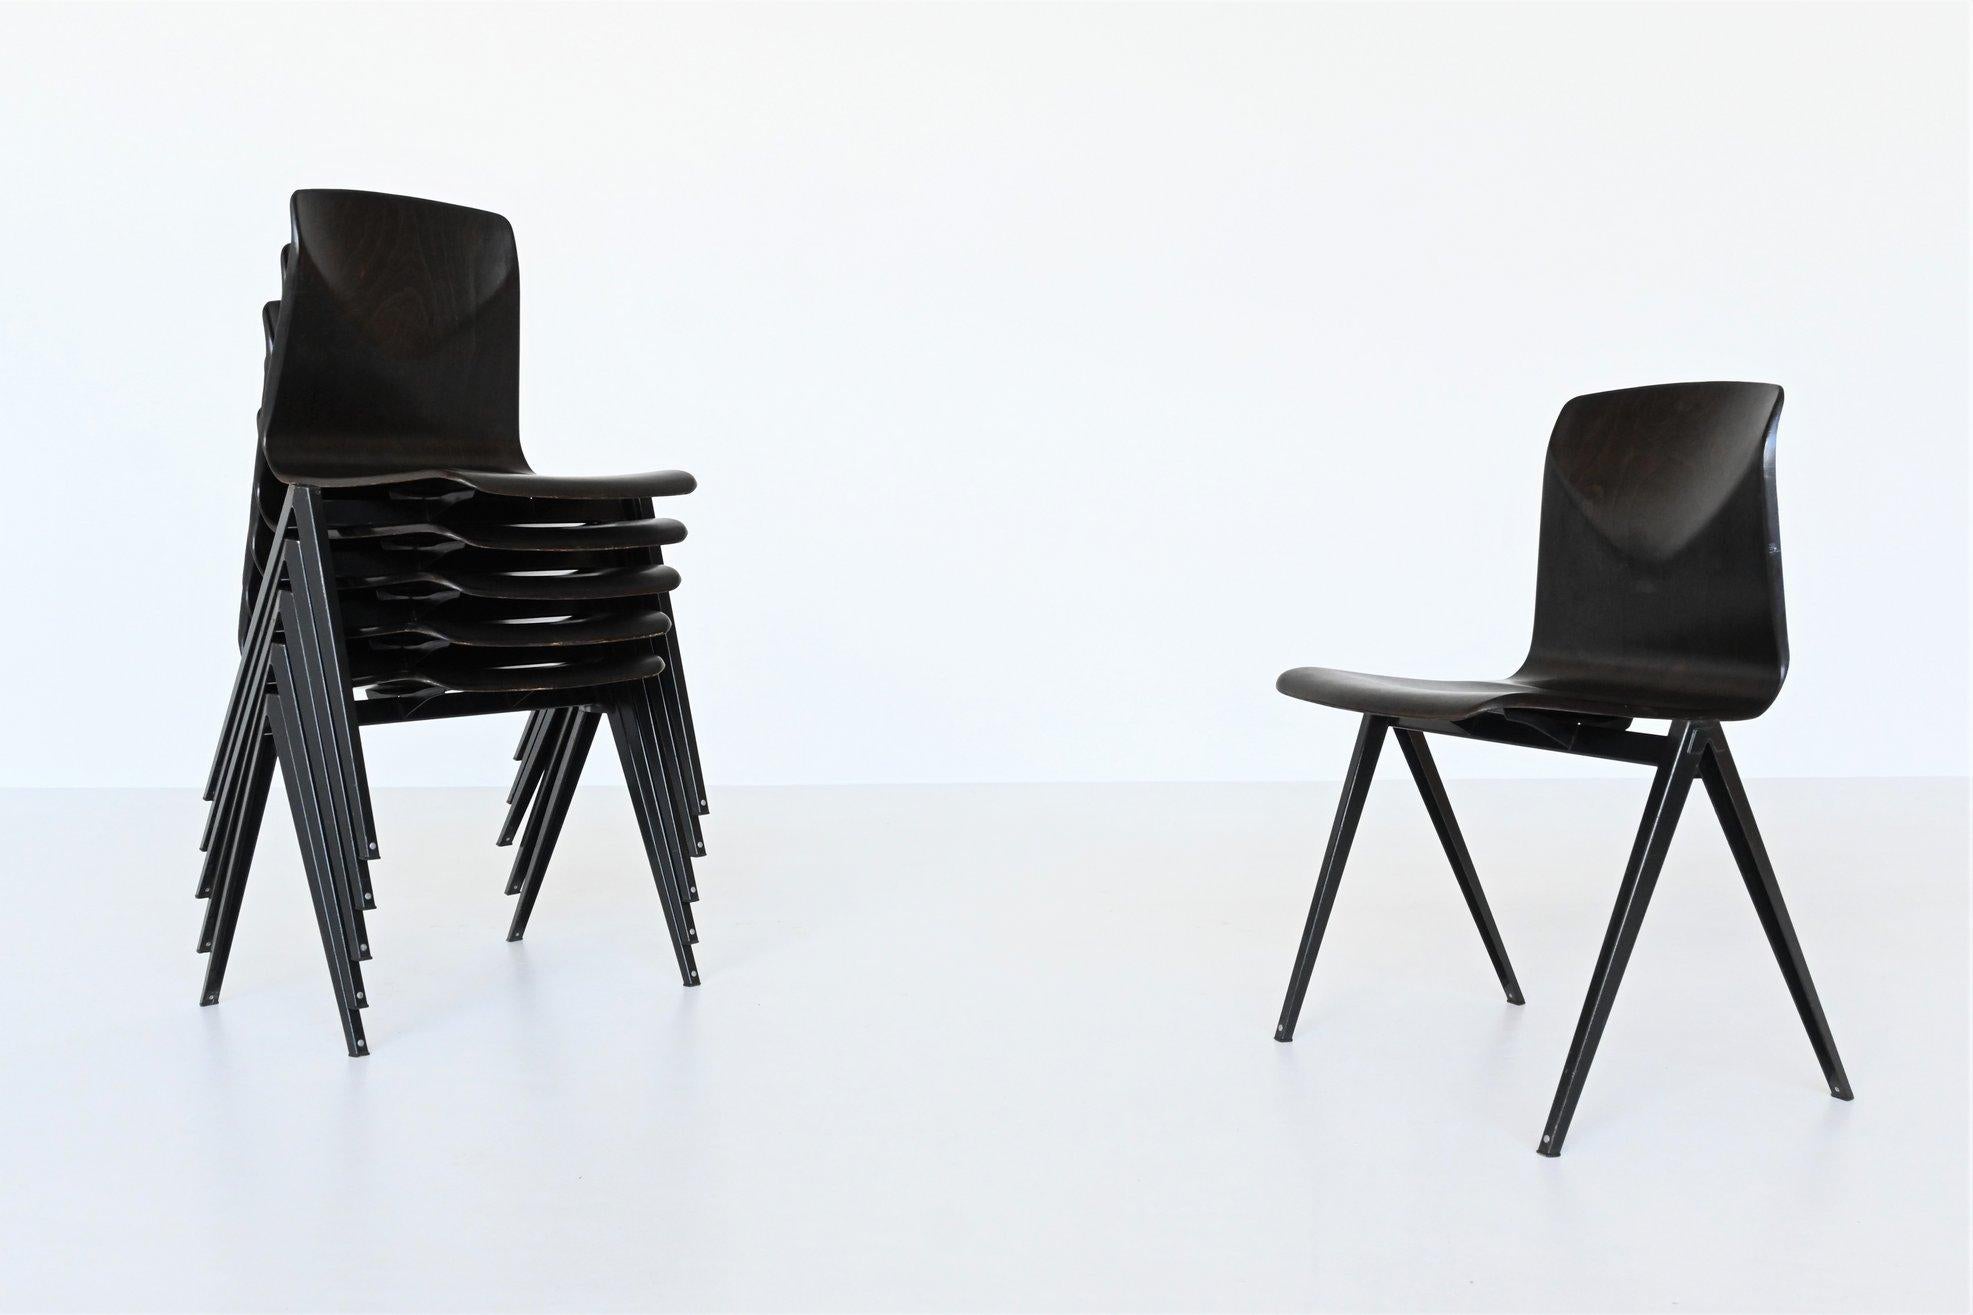 Elmar Flototto Model S22 Black Stacking Chairs Pagholz, Germany, 1970 1